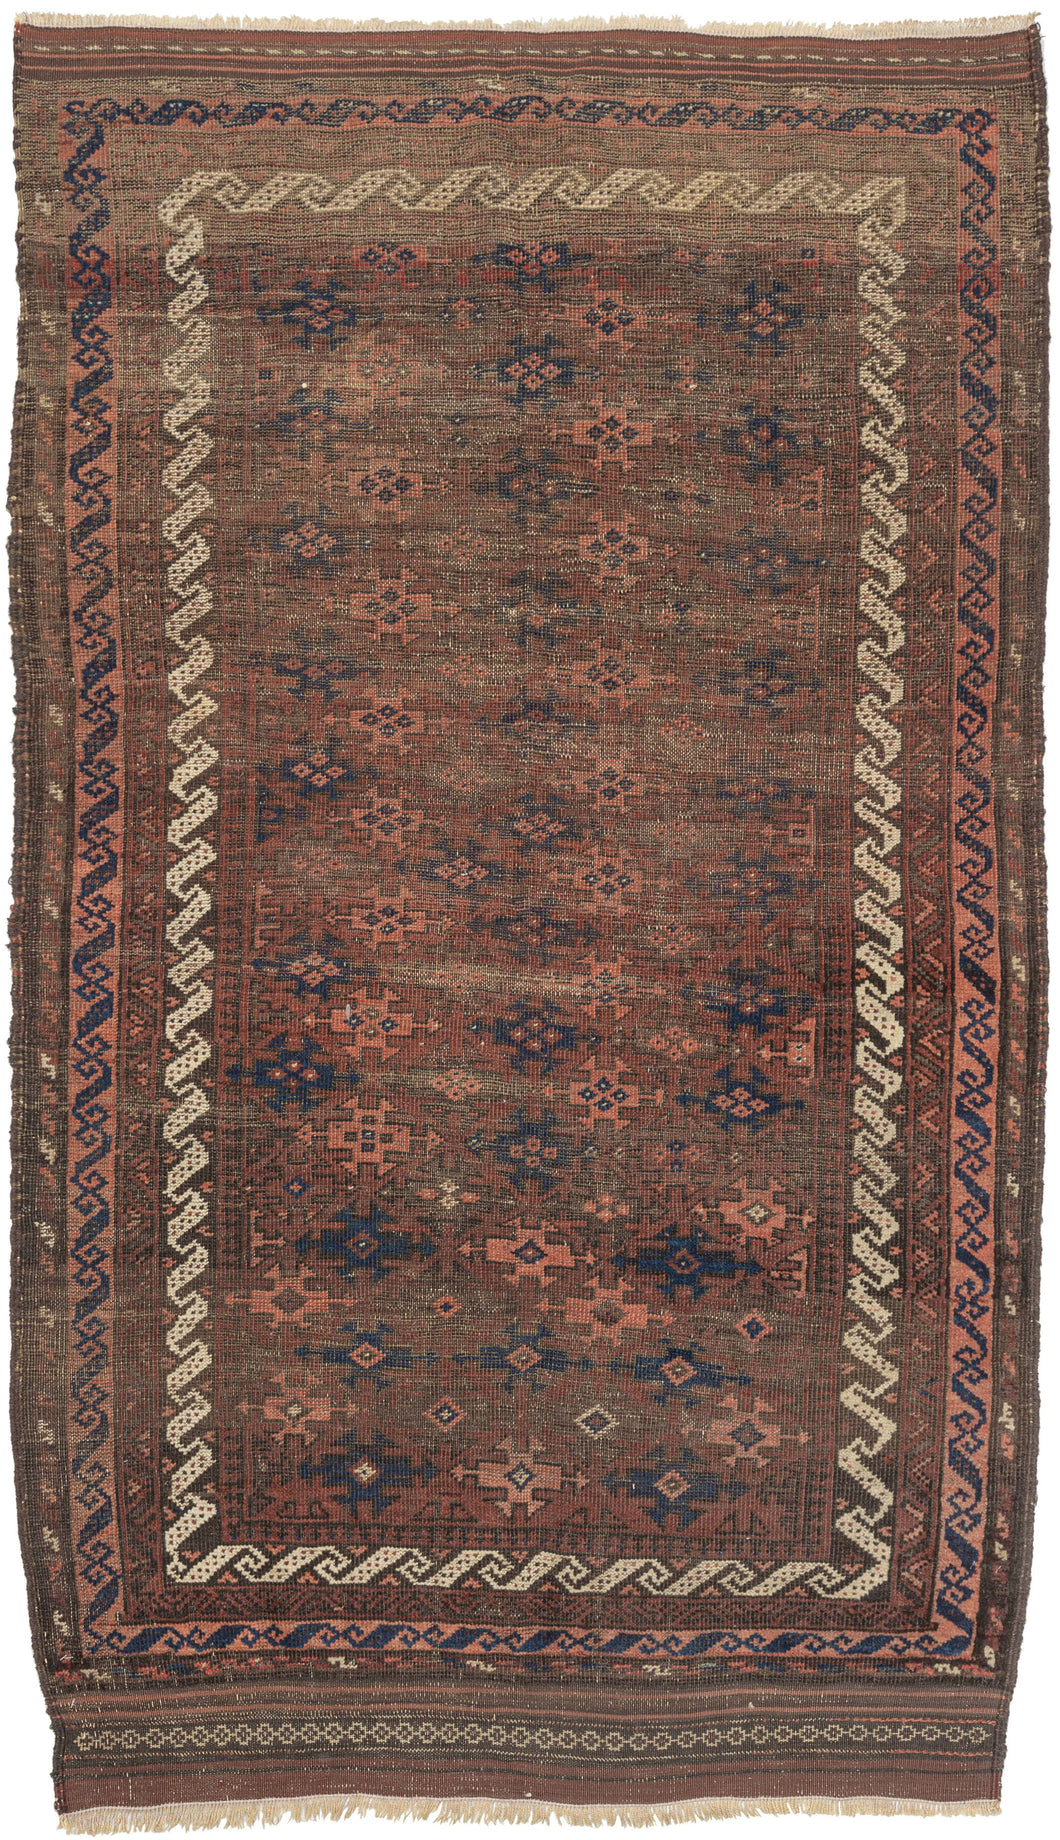 This Baluch rug was handwoven in Afghanistan during the second quarter of the 20th century.   This rug features an all-over field of geometric devices in blues, pinks and browns on reddish brown ground. Framed by multiple borders including meandering 